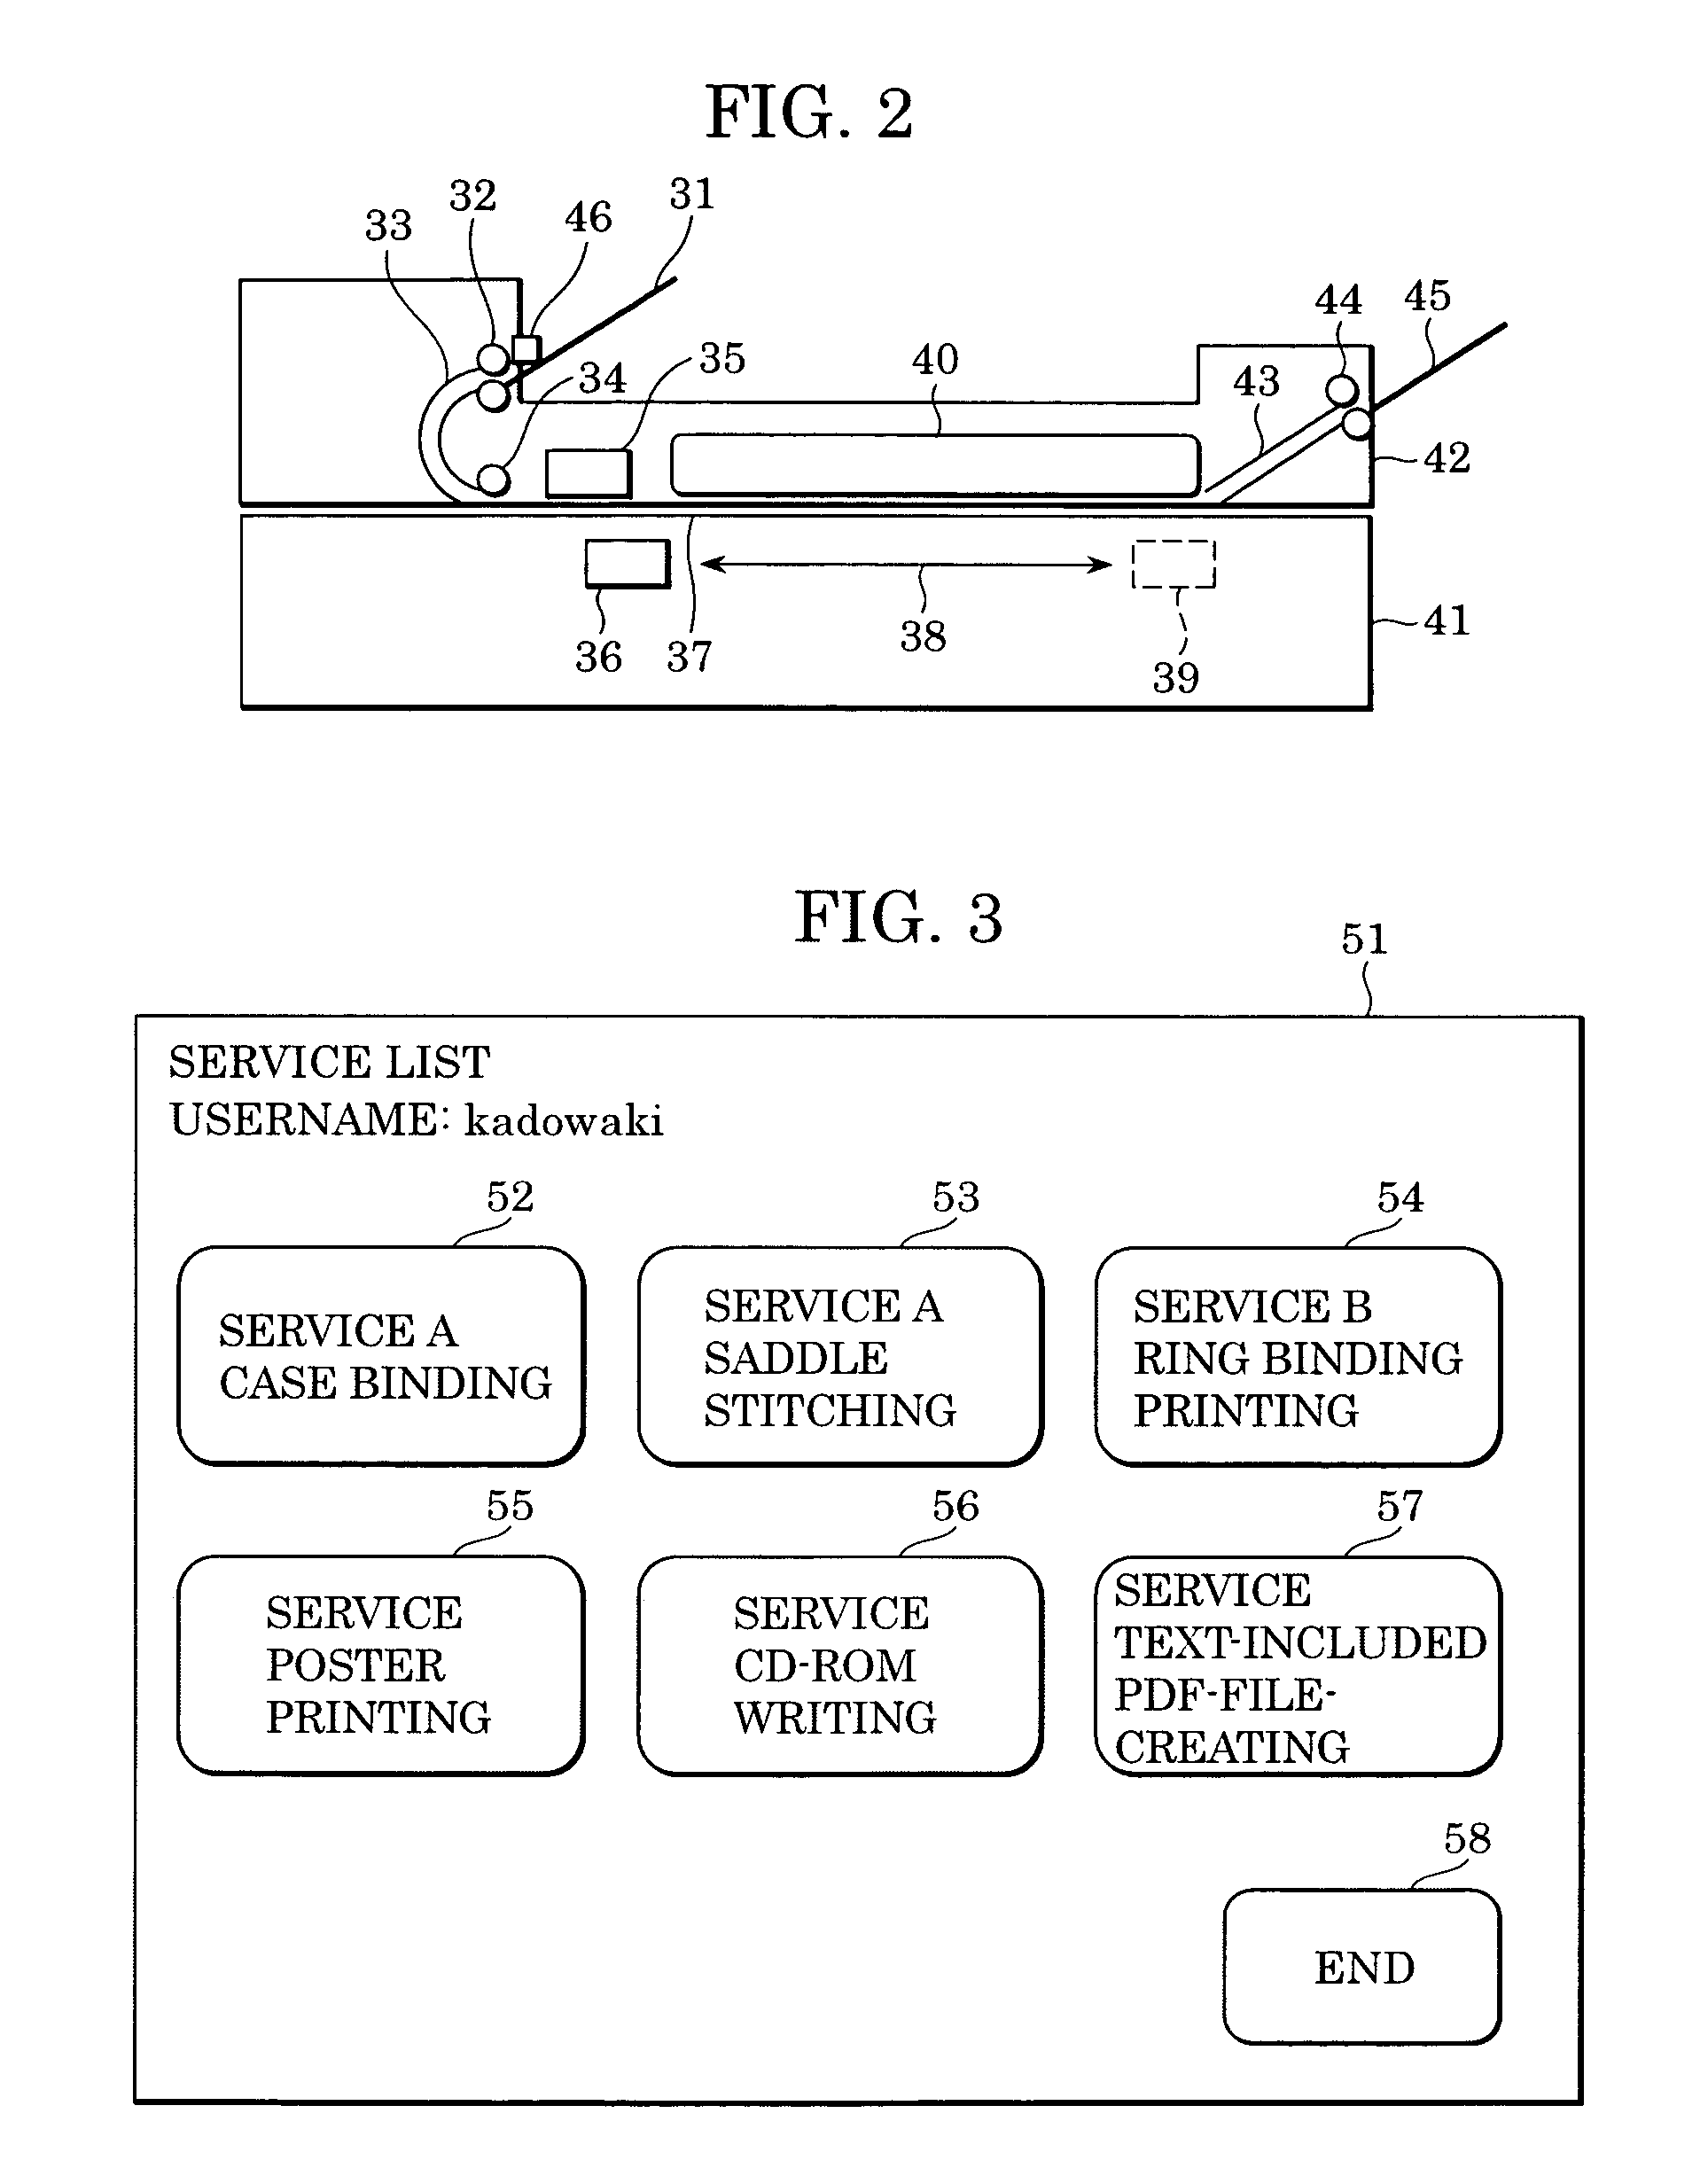 Printing service ordering system and ordering method